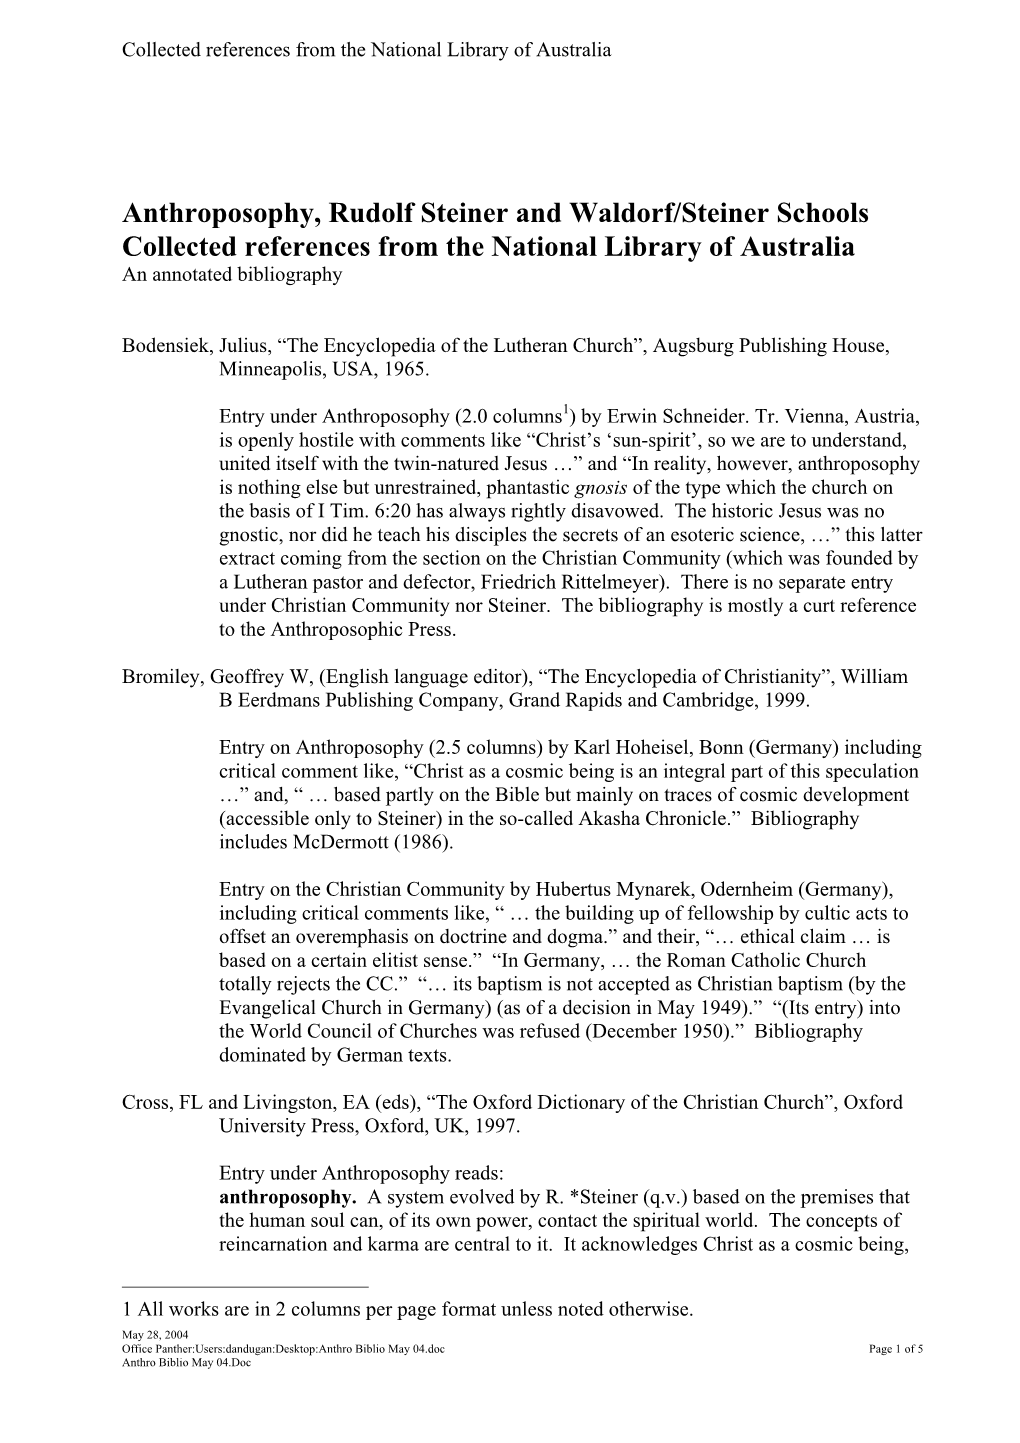 Anthroposophy, Rudolf Steiner and Waldorf/Steiner Schools Collected References from the National Library of Australia an Annotated Bibliography